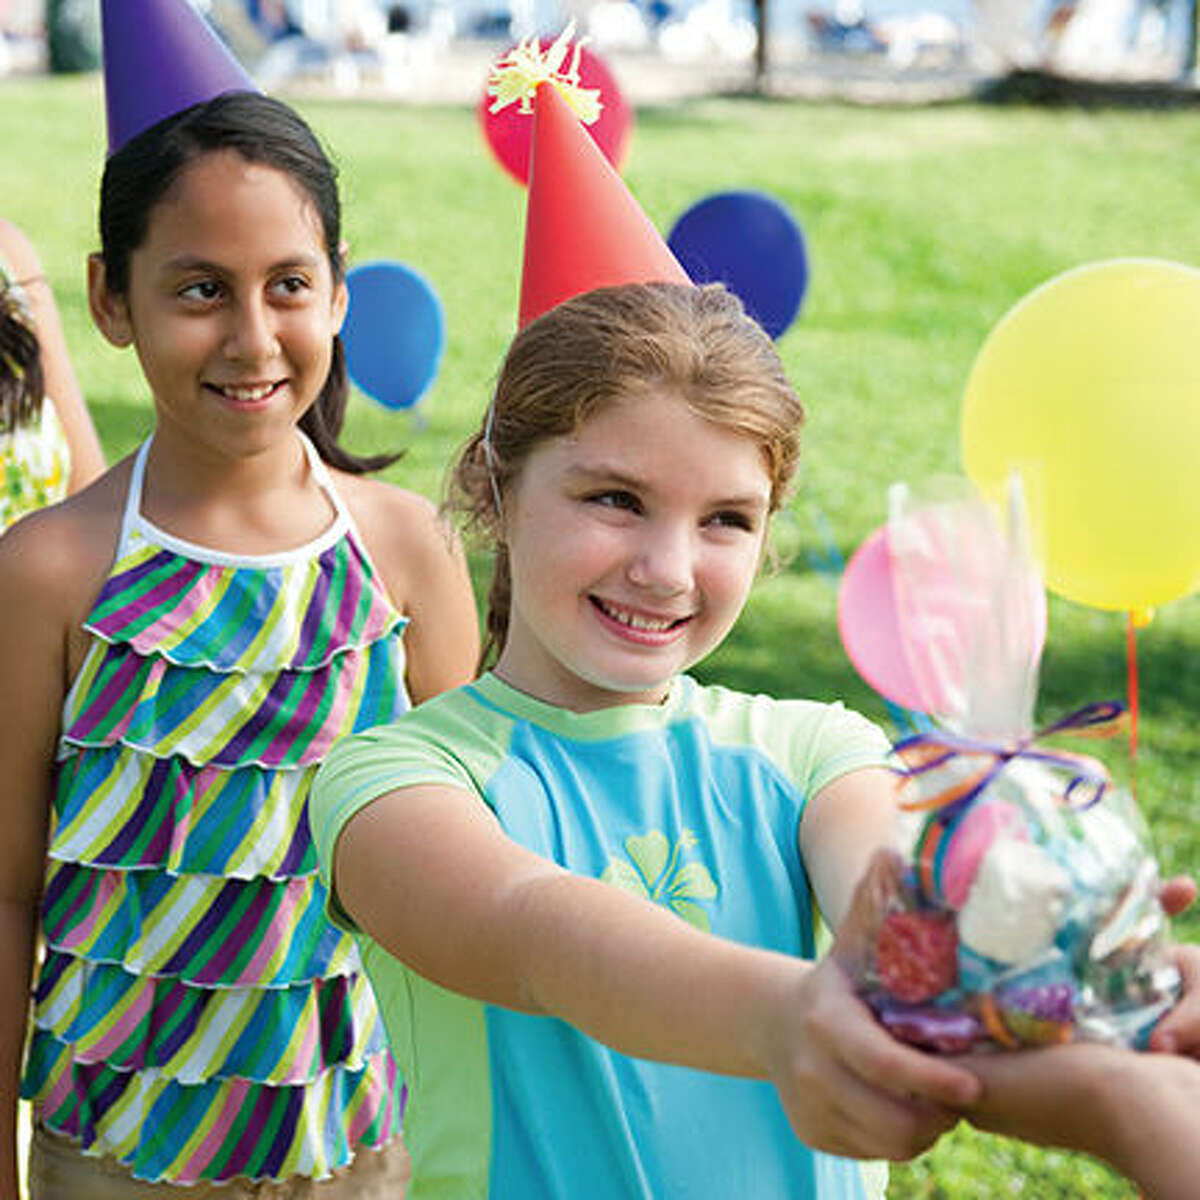 5 Simple Tips for Birthday Bash Success